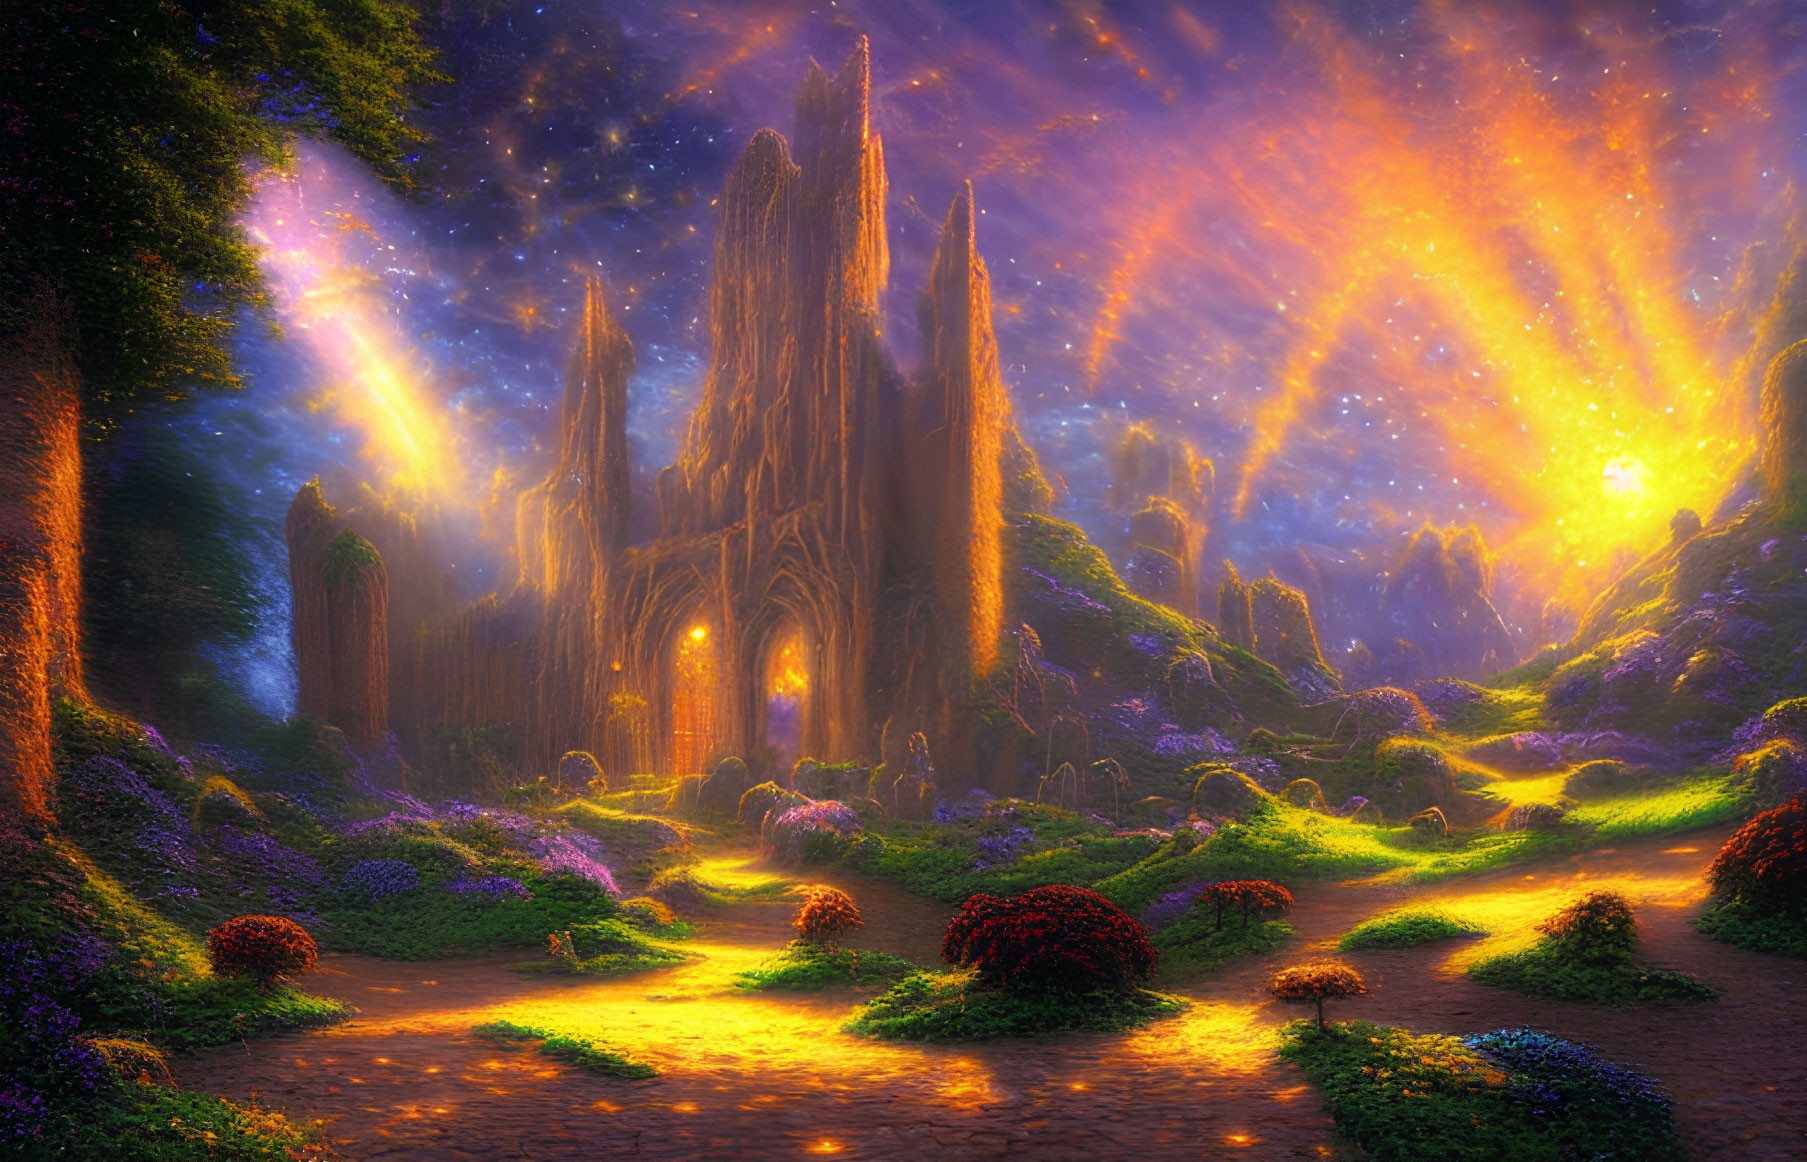 Fantastical landscape with luminous starry sky and enchanted castle path